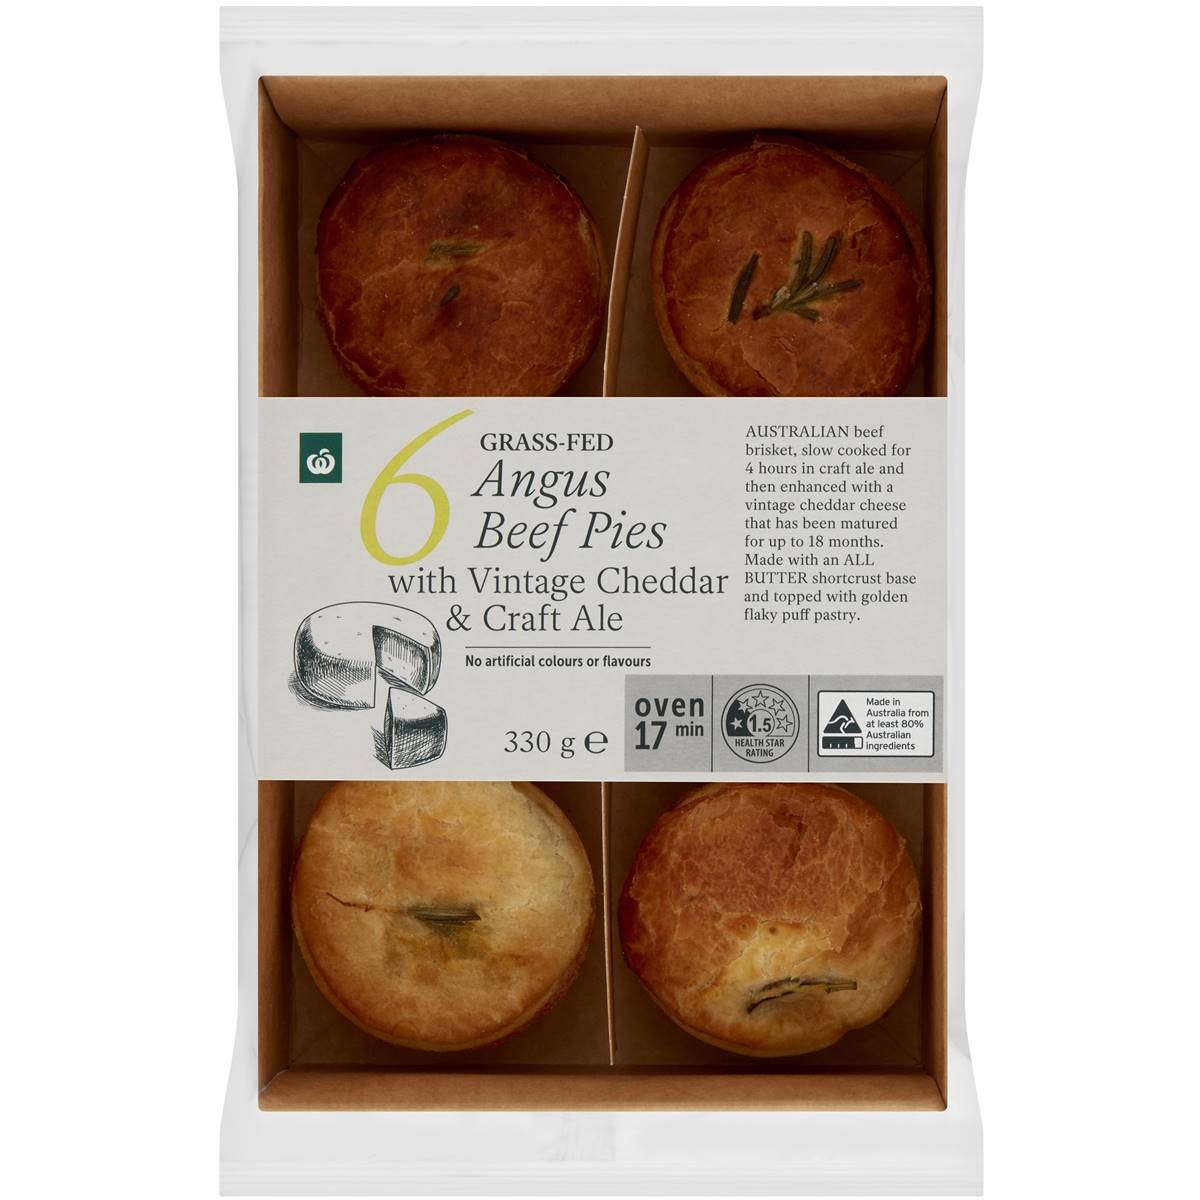 Calories in Woolworths Grass-fed Angus Beef Pies With Vintage Cheddar & Craft Ale